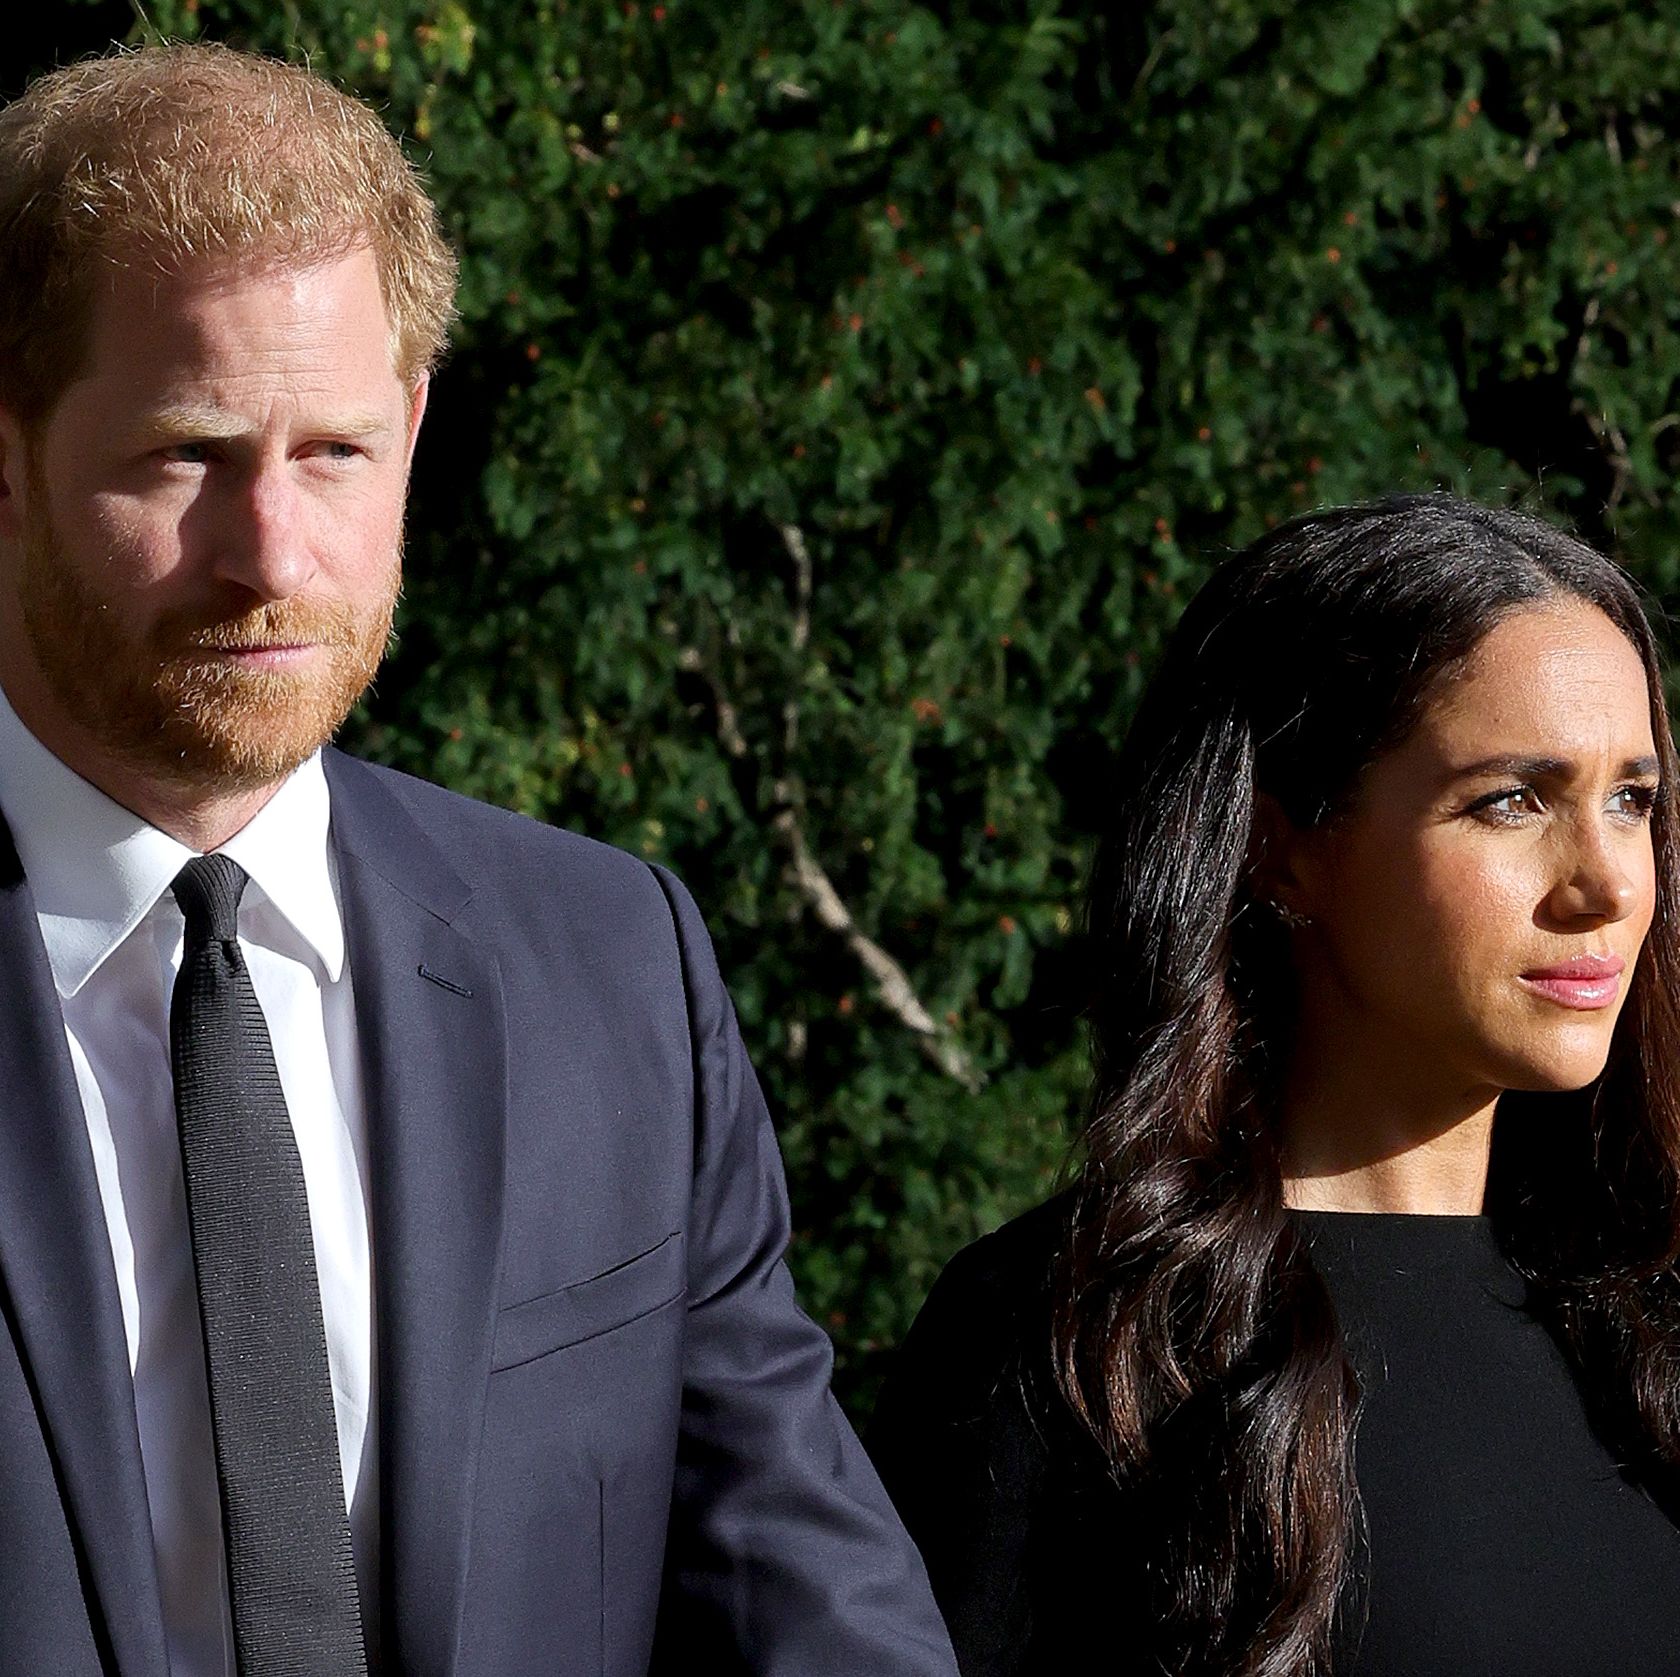 Harry and Meghan's Rep Says Their Royal Exit Was *Never* About Wanting More Privacy